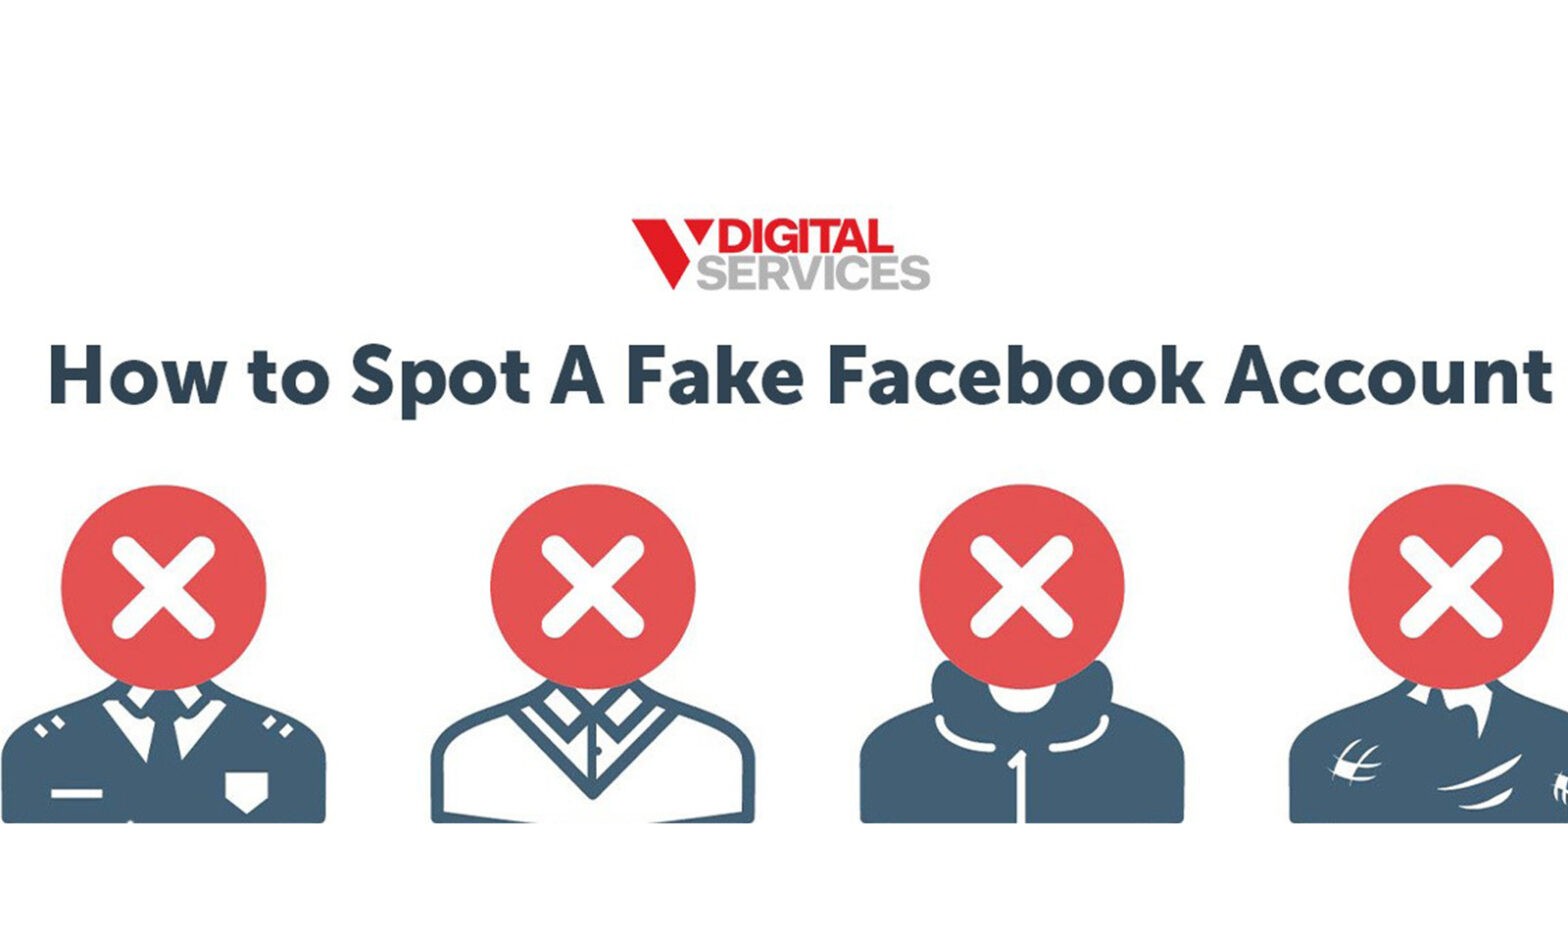 Featured image for post: How To Spot A Fake Facebook Account